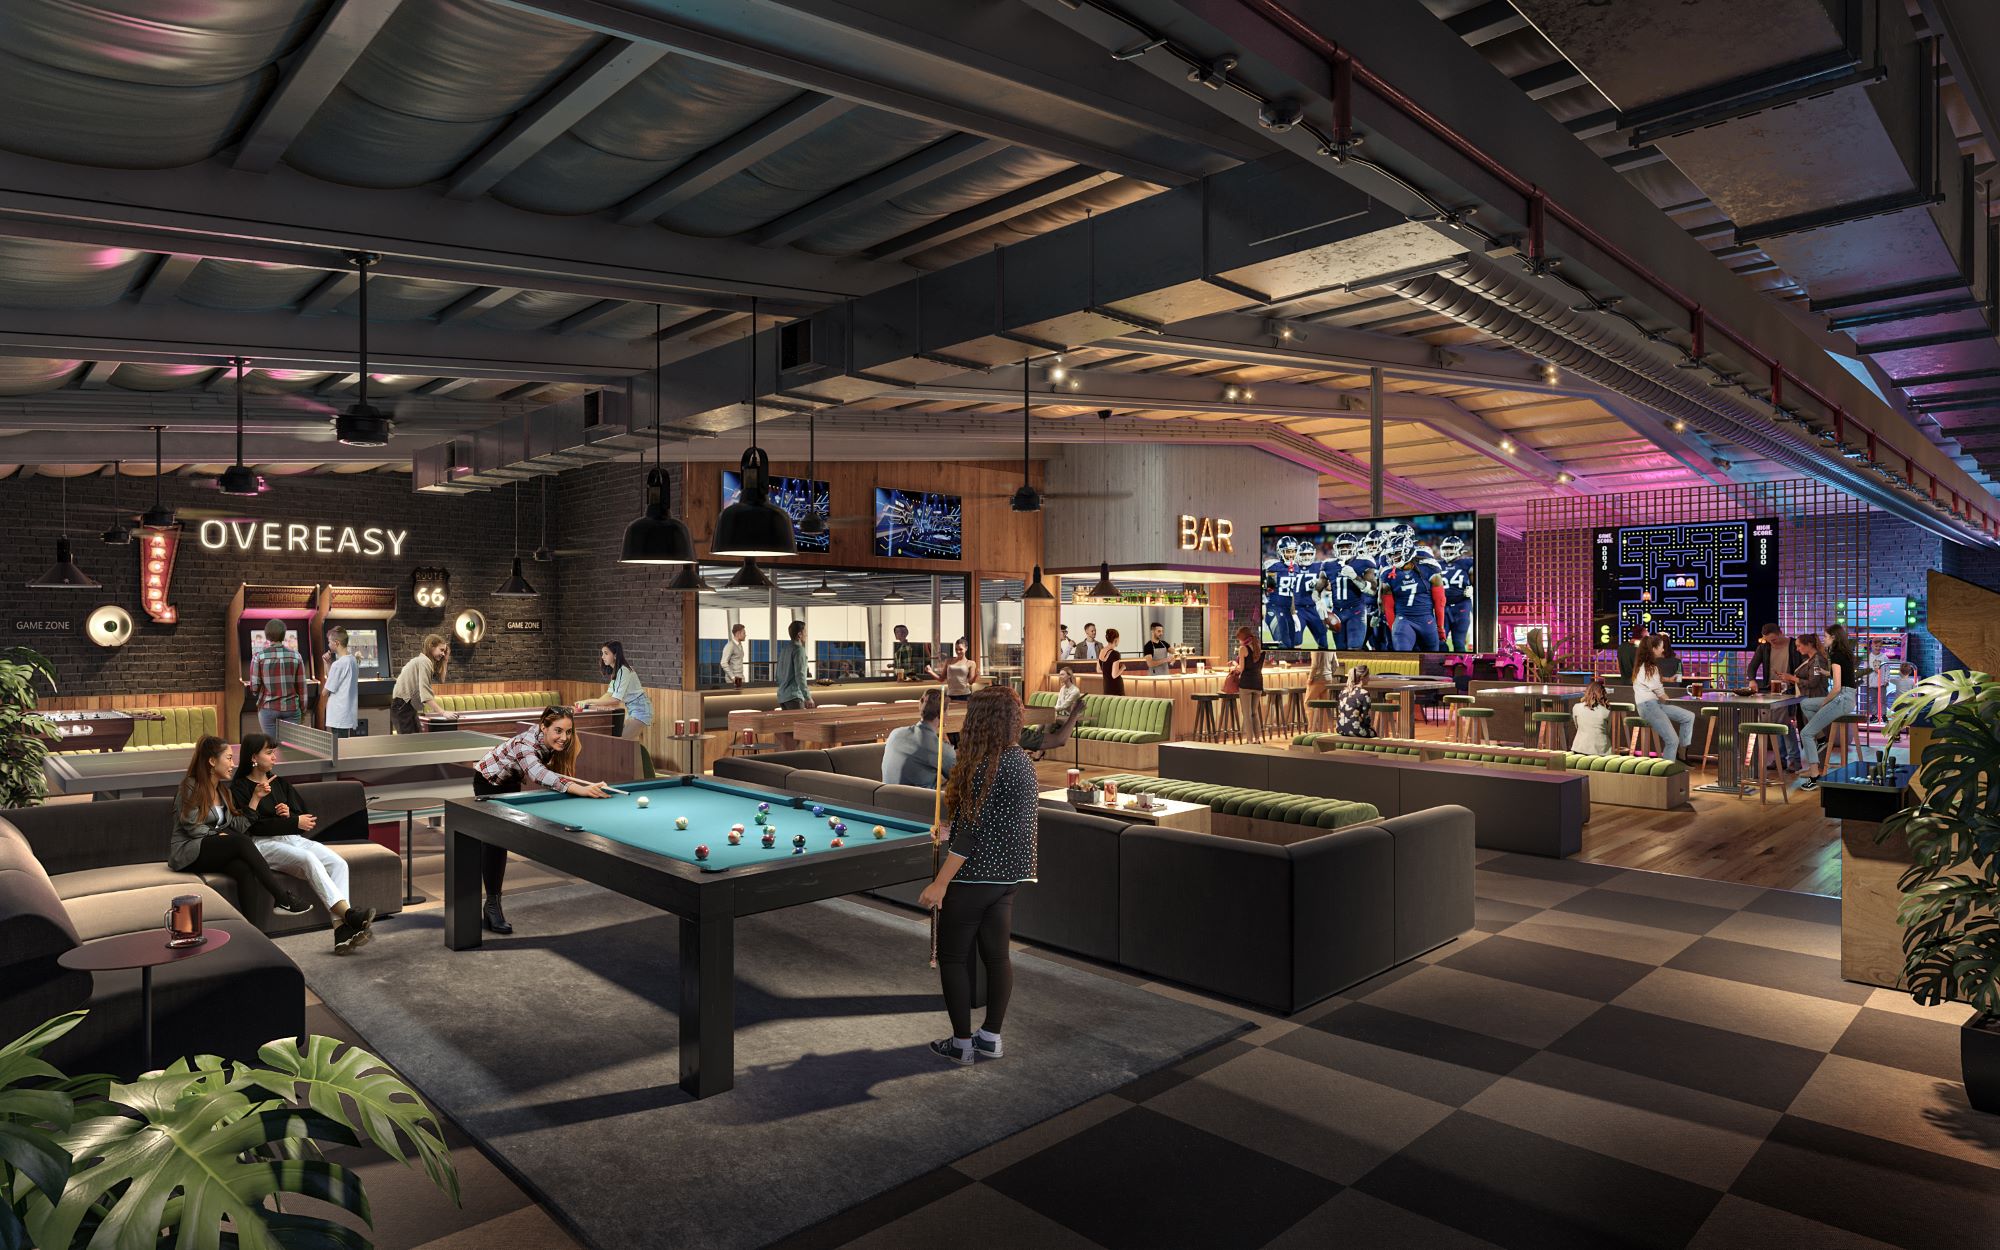 rendering of larks game zone with bar and pool table